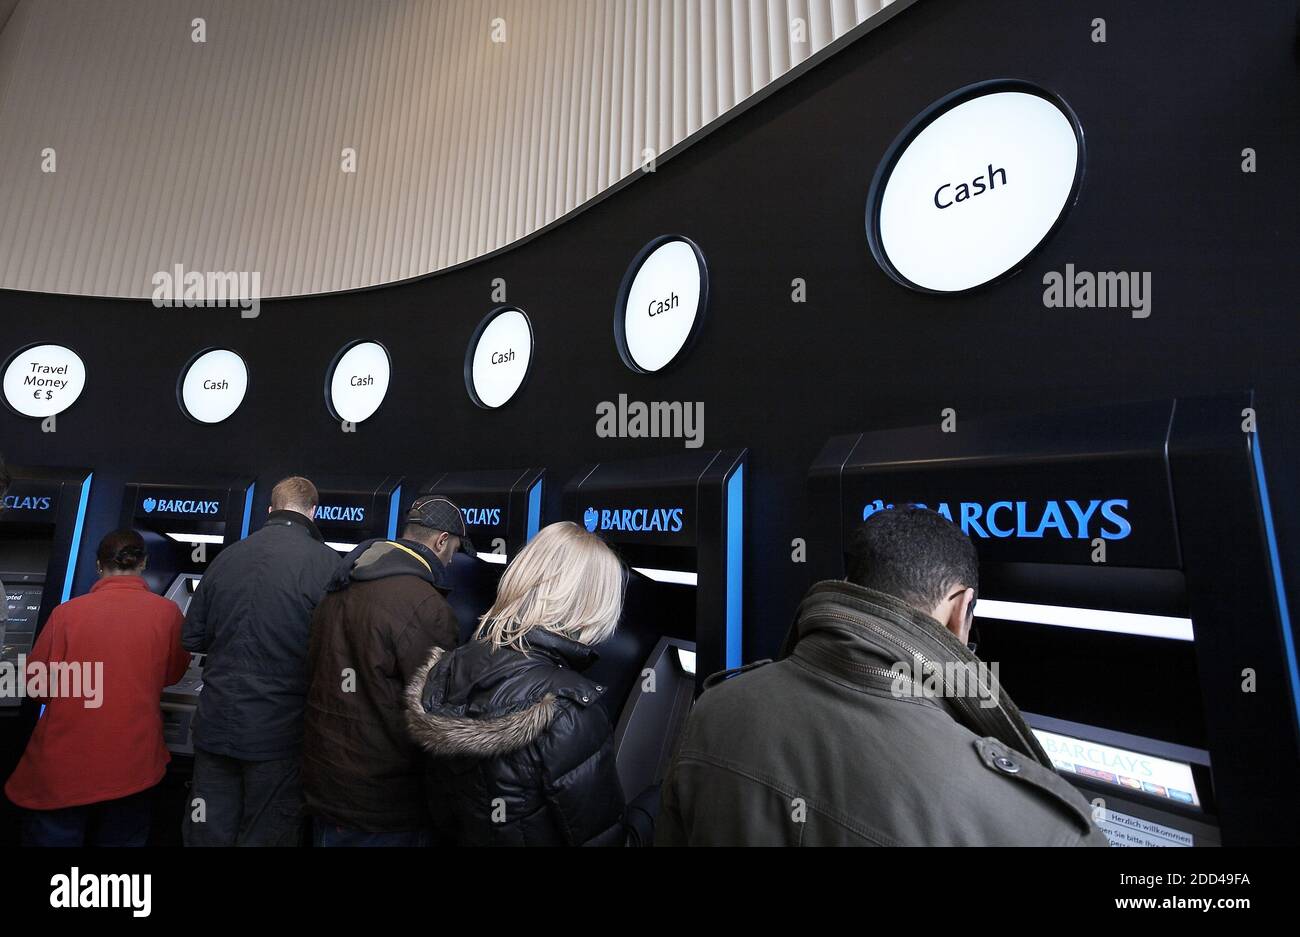 GREAT BRITAIN / London /Customers use a cashpoint machine at a Barclays Bank branch in London . People withdrawaL cash at ATM . Stock Photo